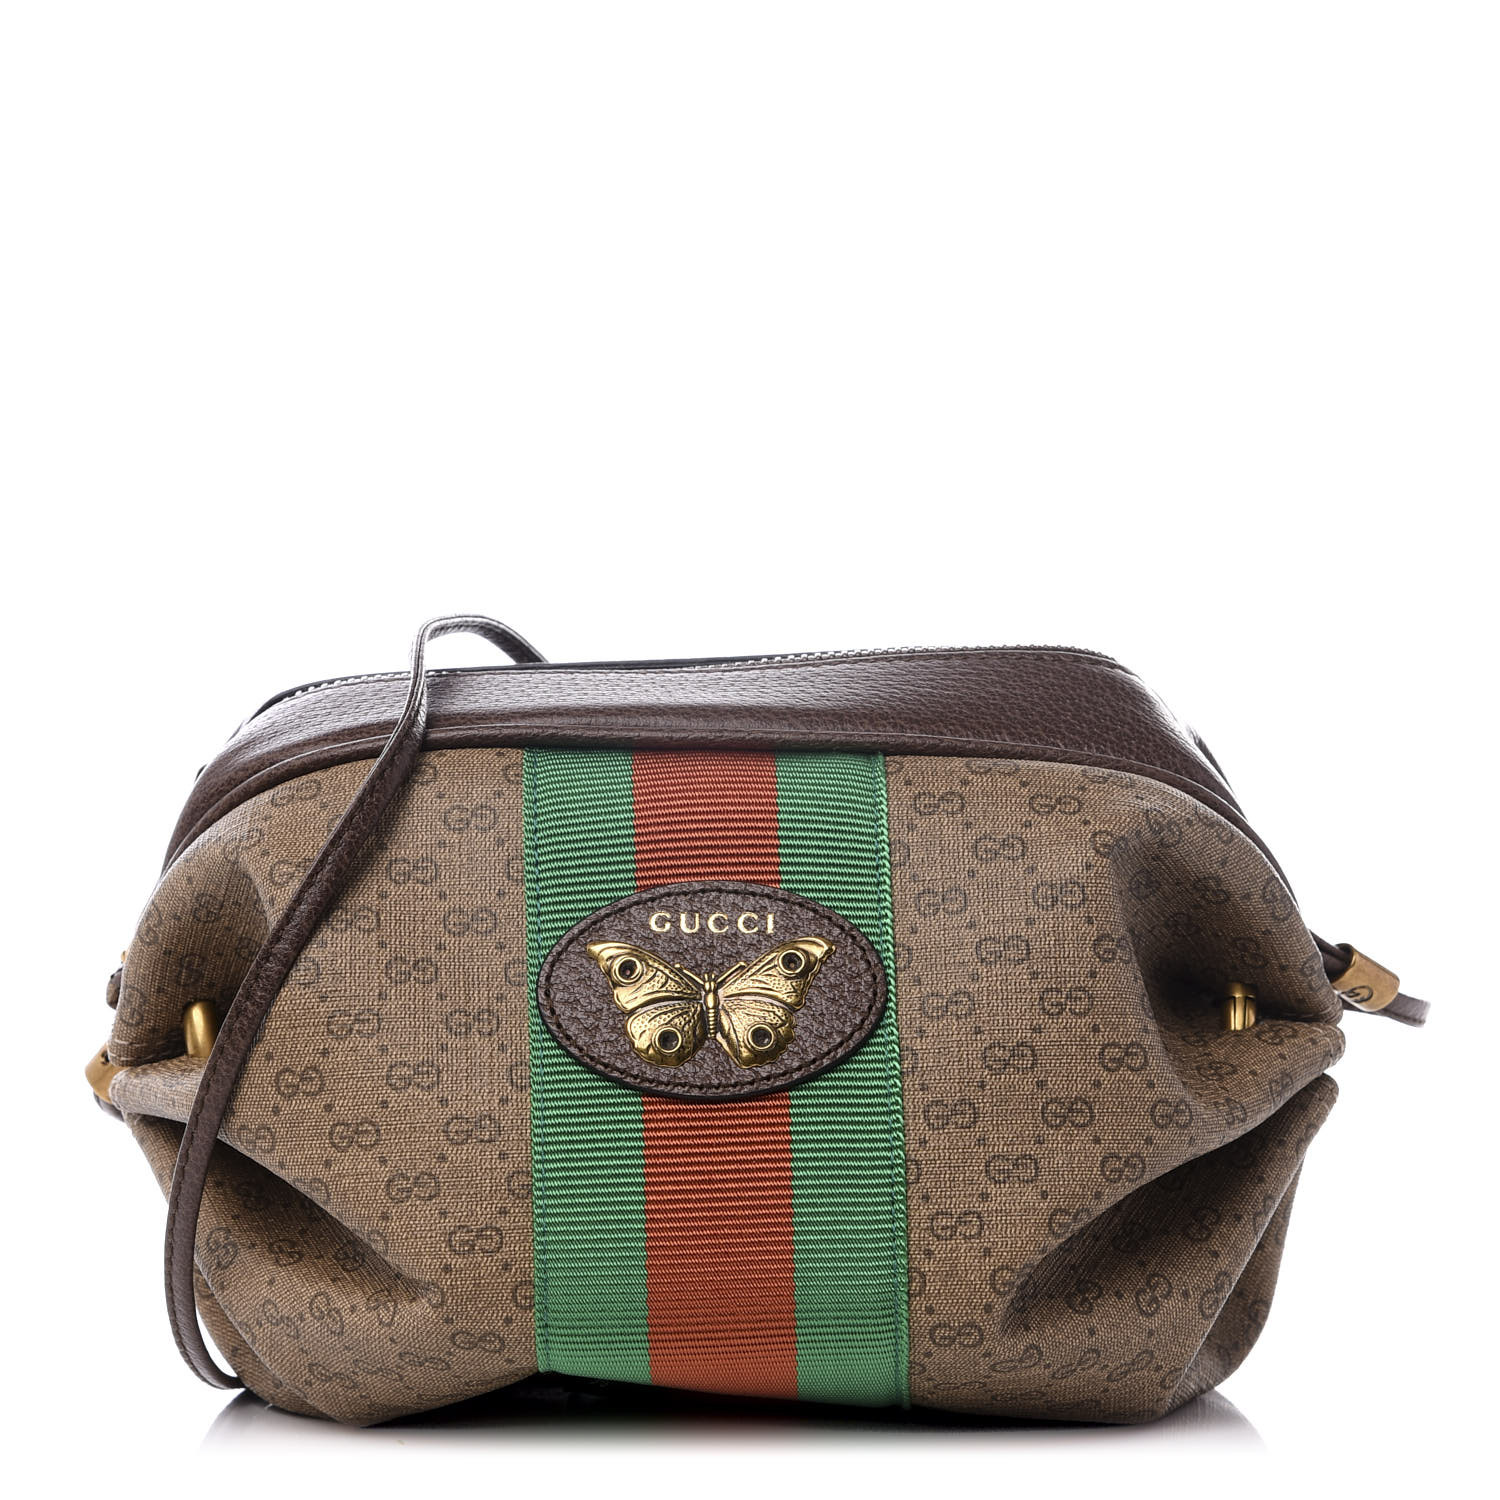 gucci crossbody bag with butterfly